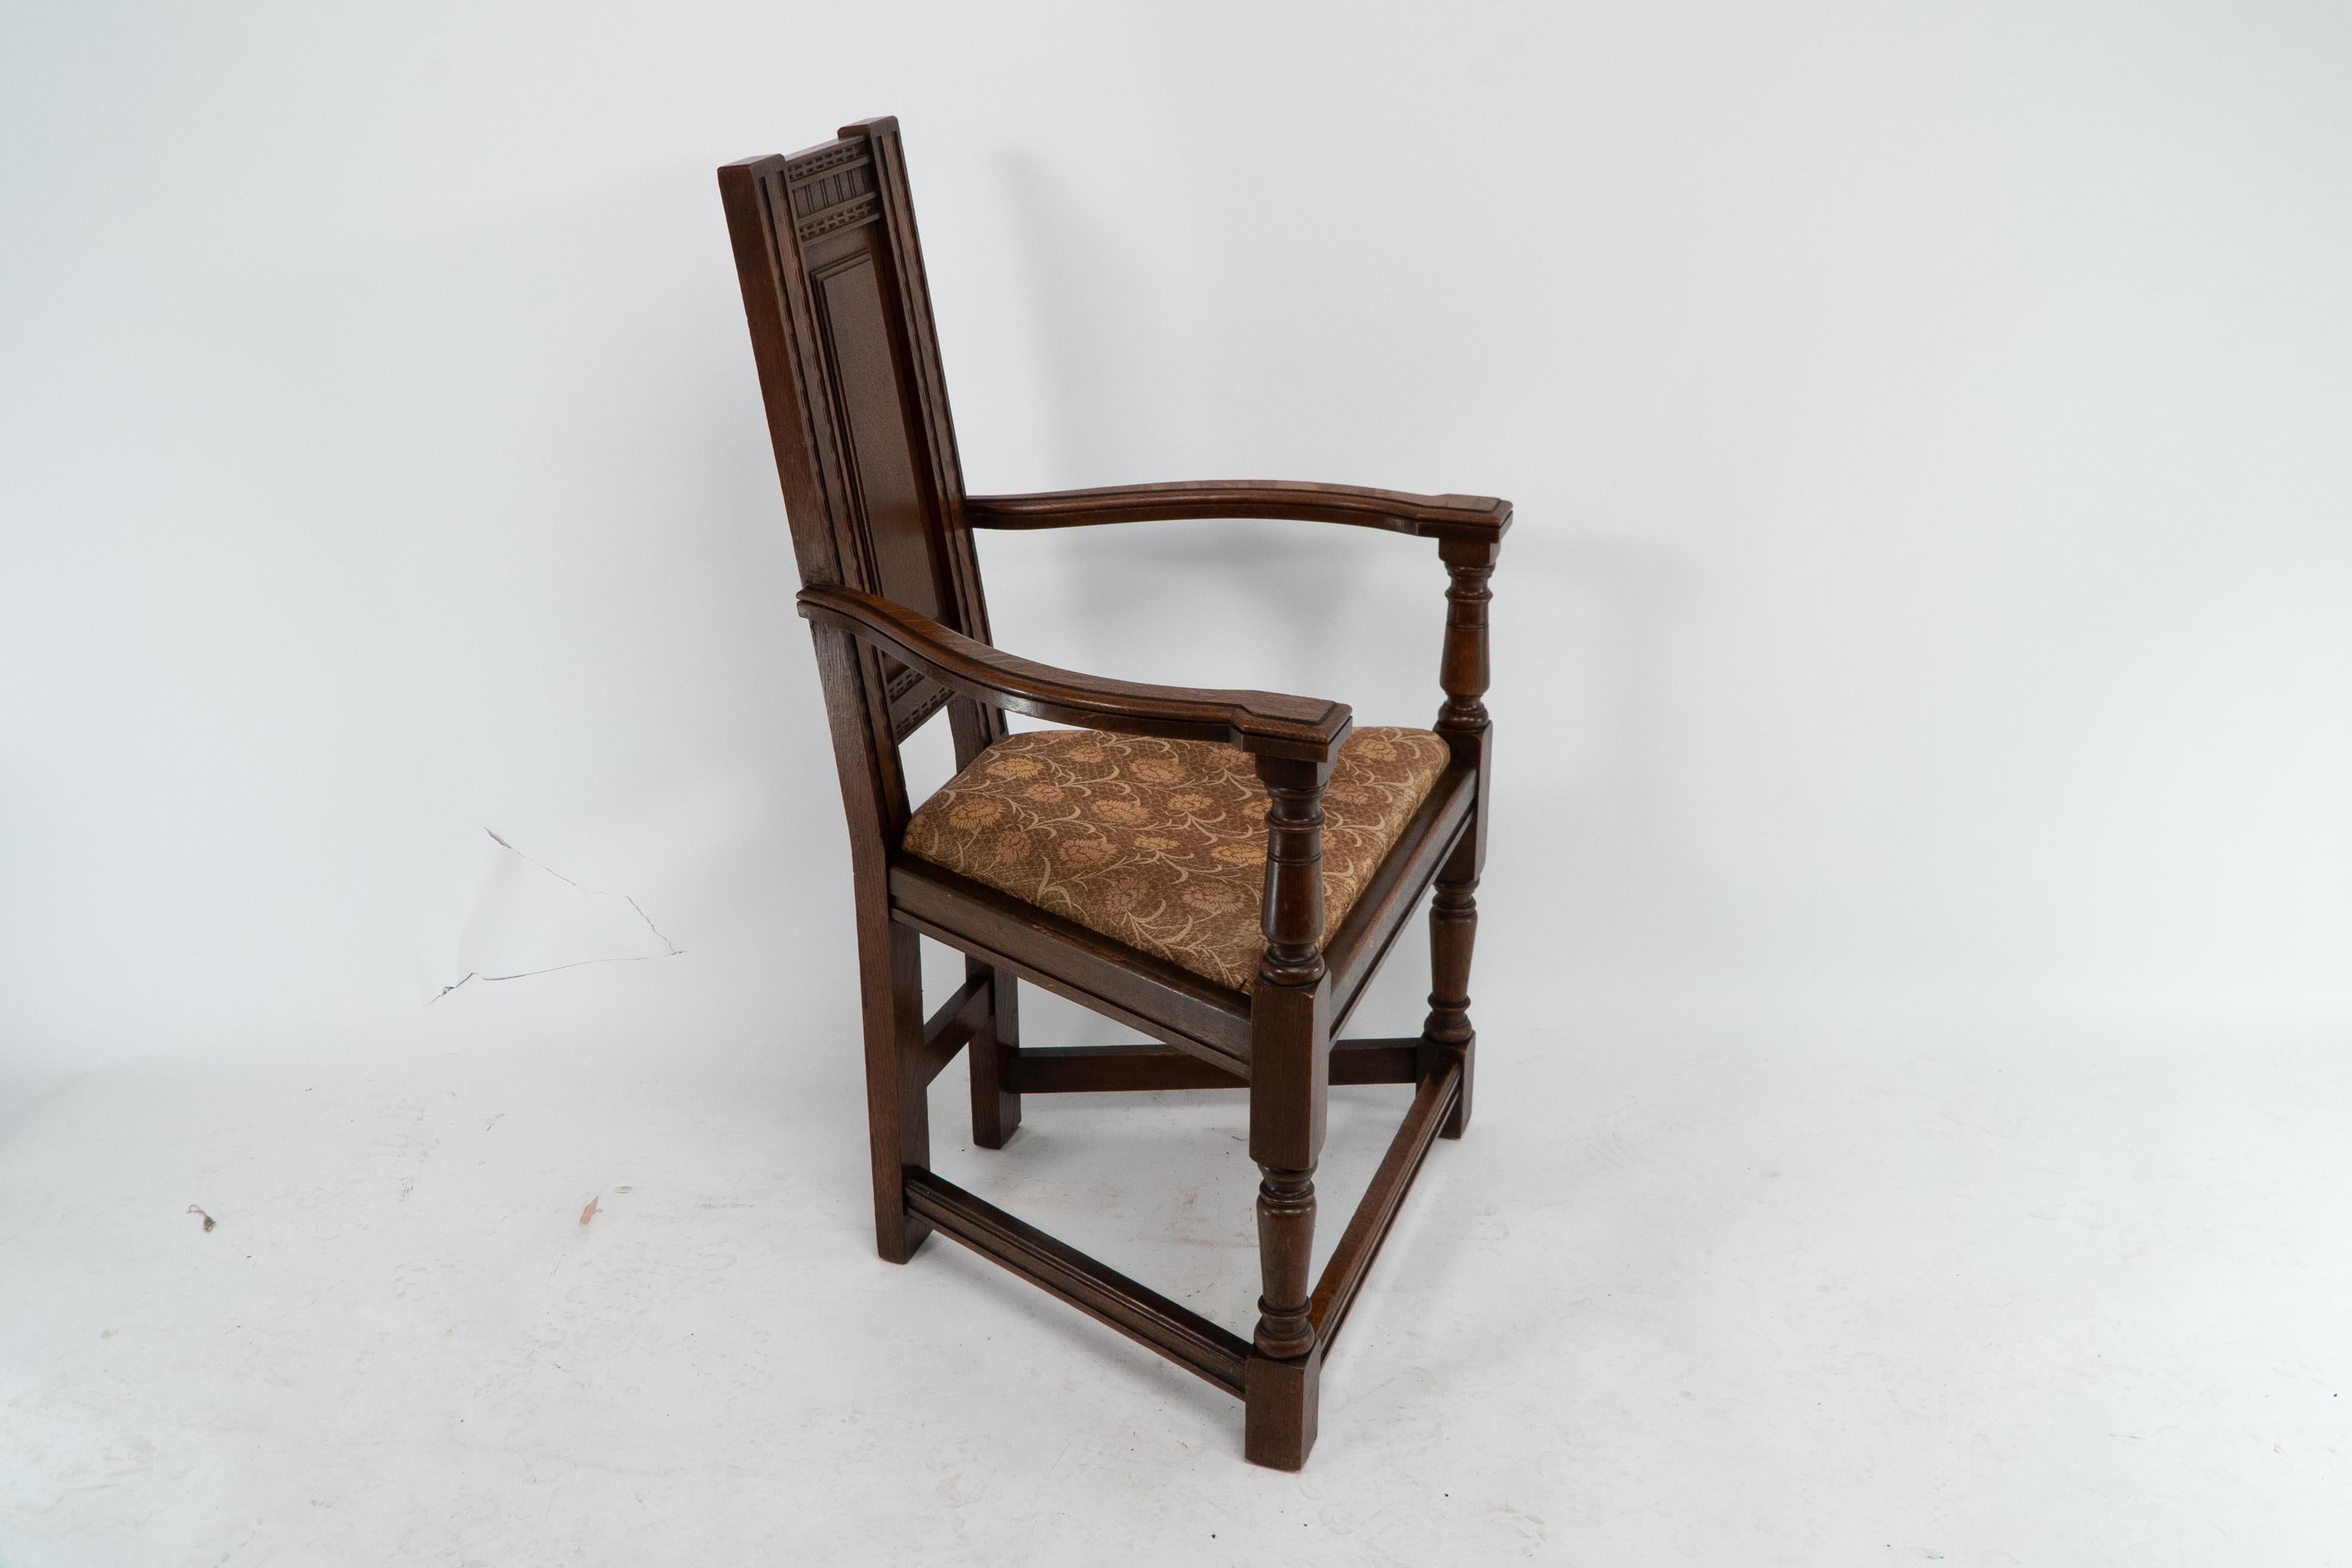 English E W Godwin for William Watt. An oak Shakespeare armchair. One of only four known For Sale